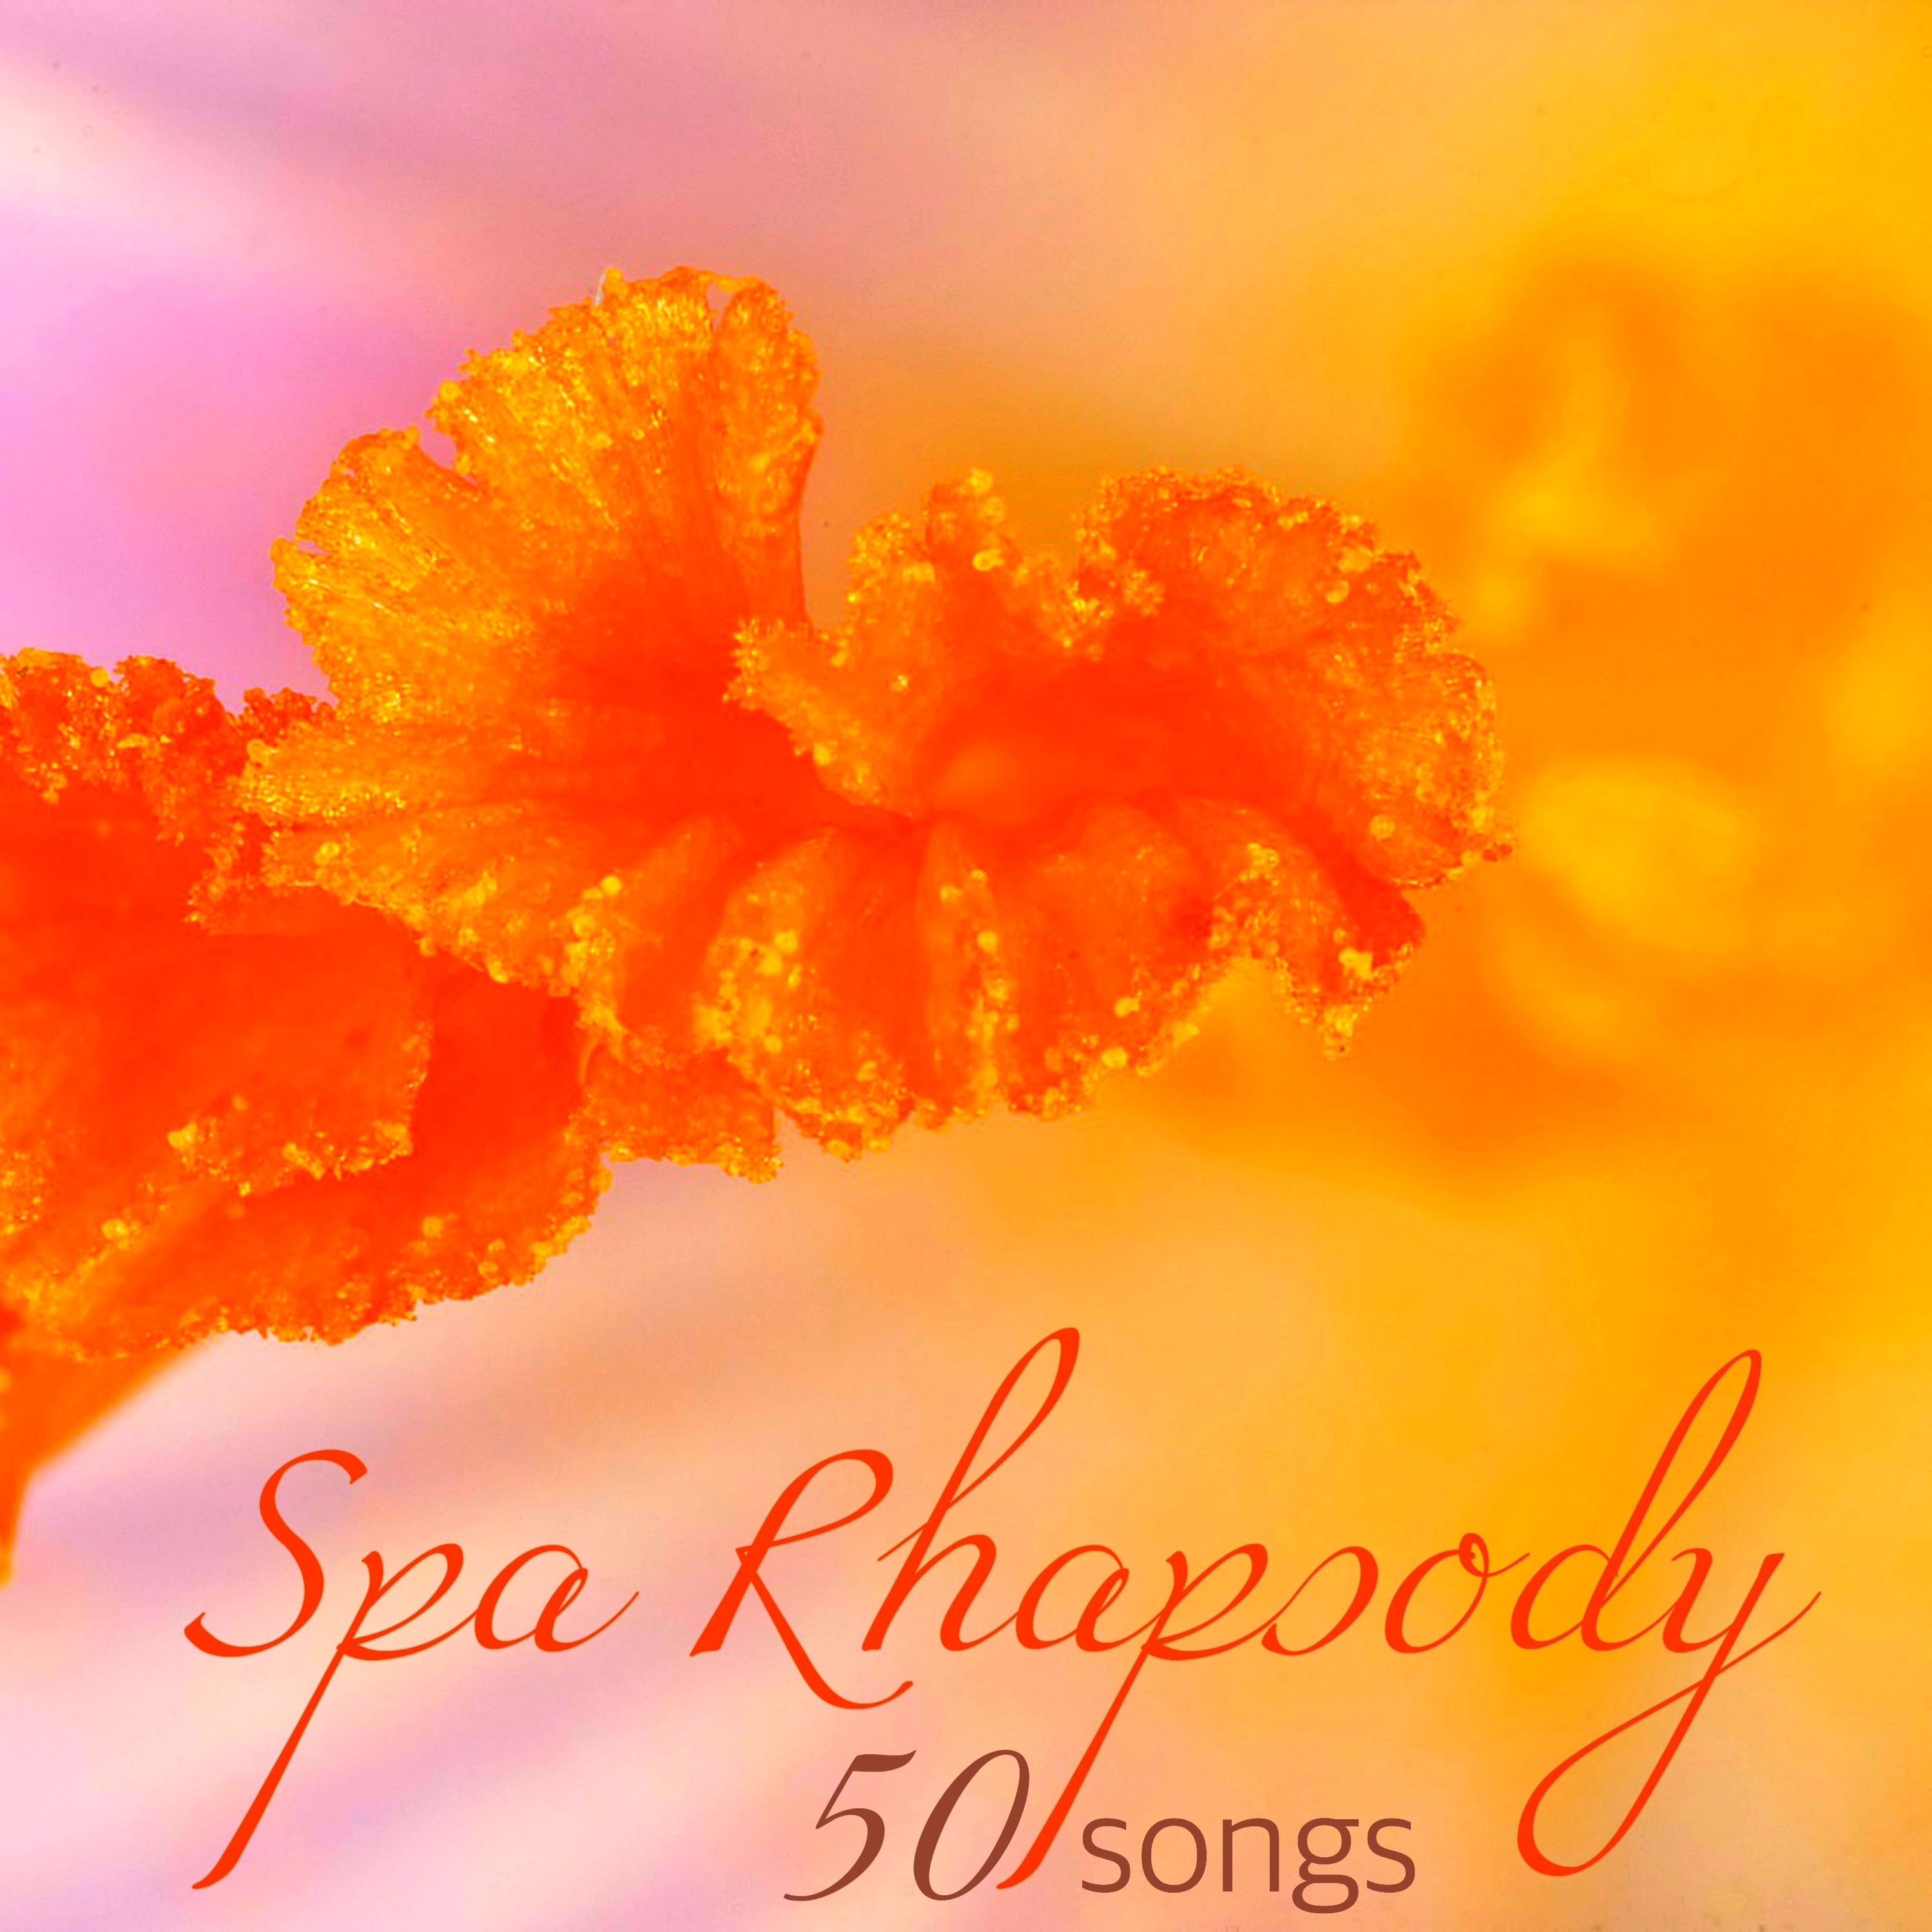 Spa Rhapsody 50 Songs  Healing and Quiet Music for Your Day Spa